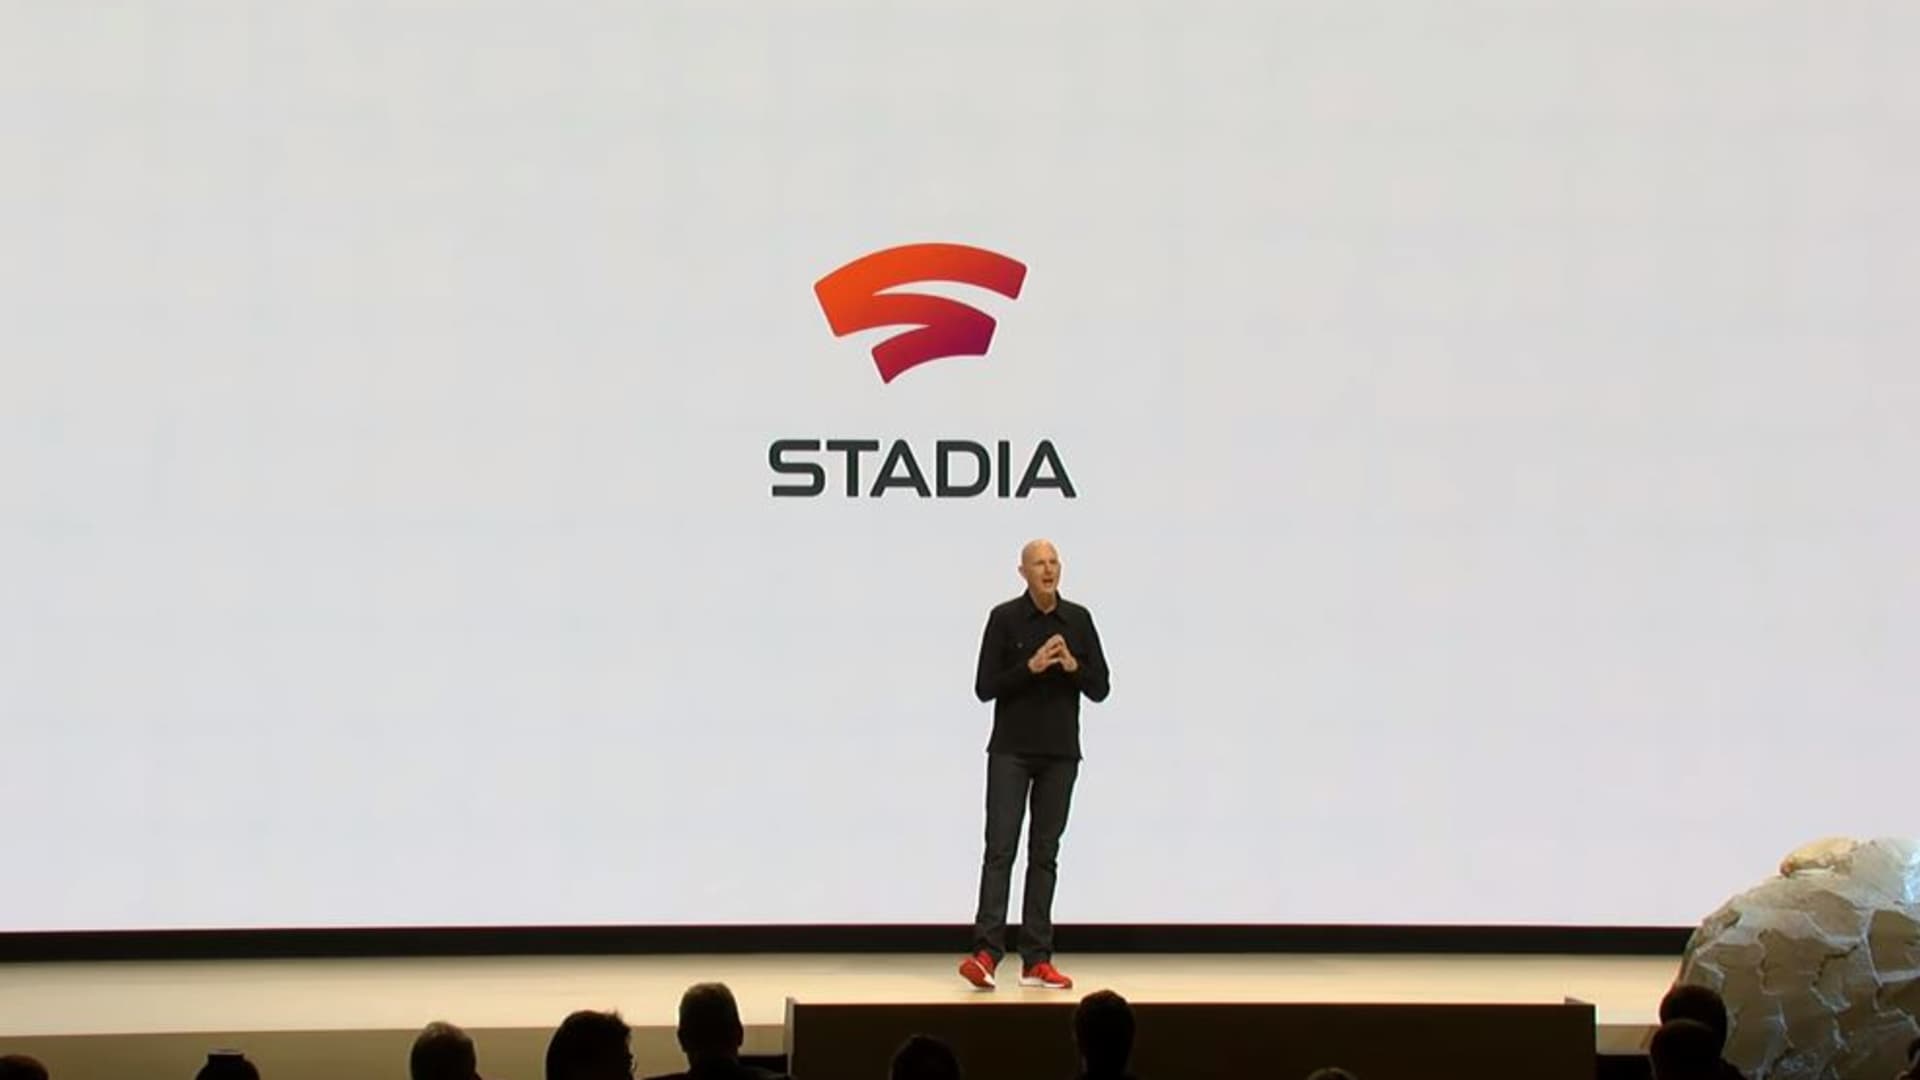 Google is shutting down gaming service Stadia in the latest cost-cutting effort